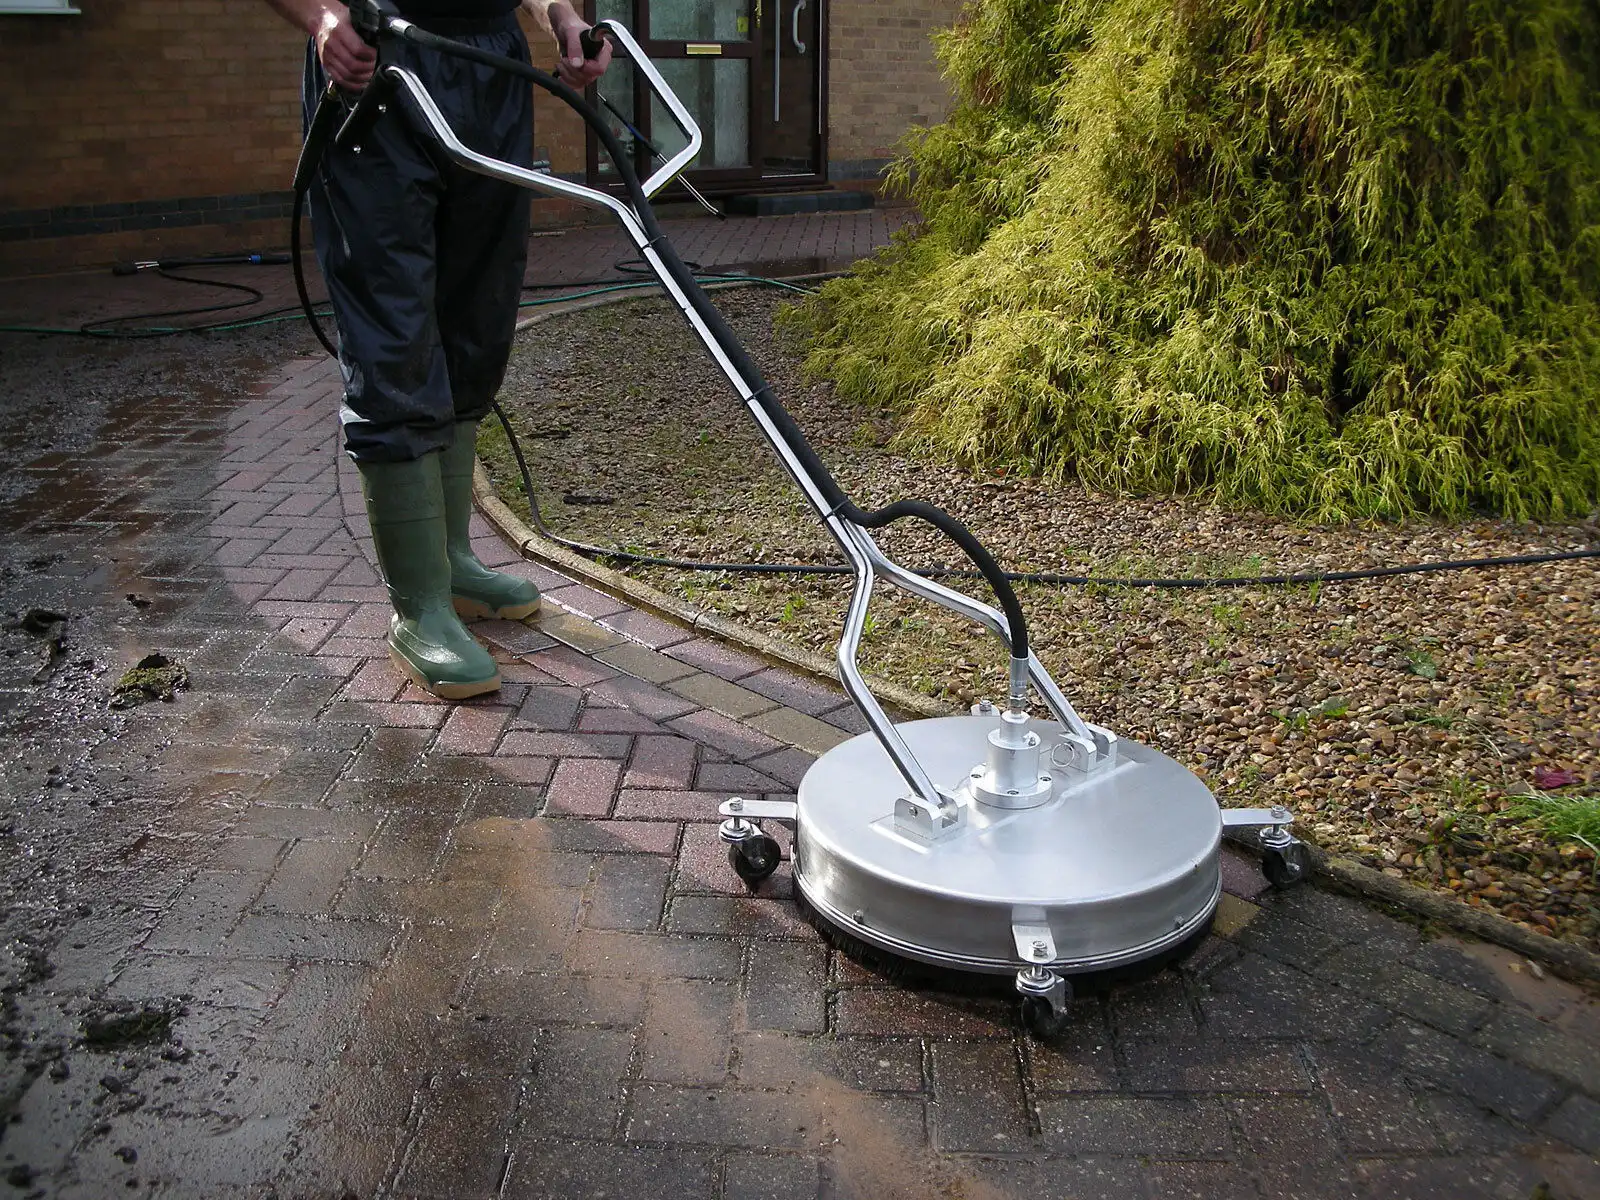 Choosing a Pressure Washer Surface Cleaner: Key Considerations